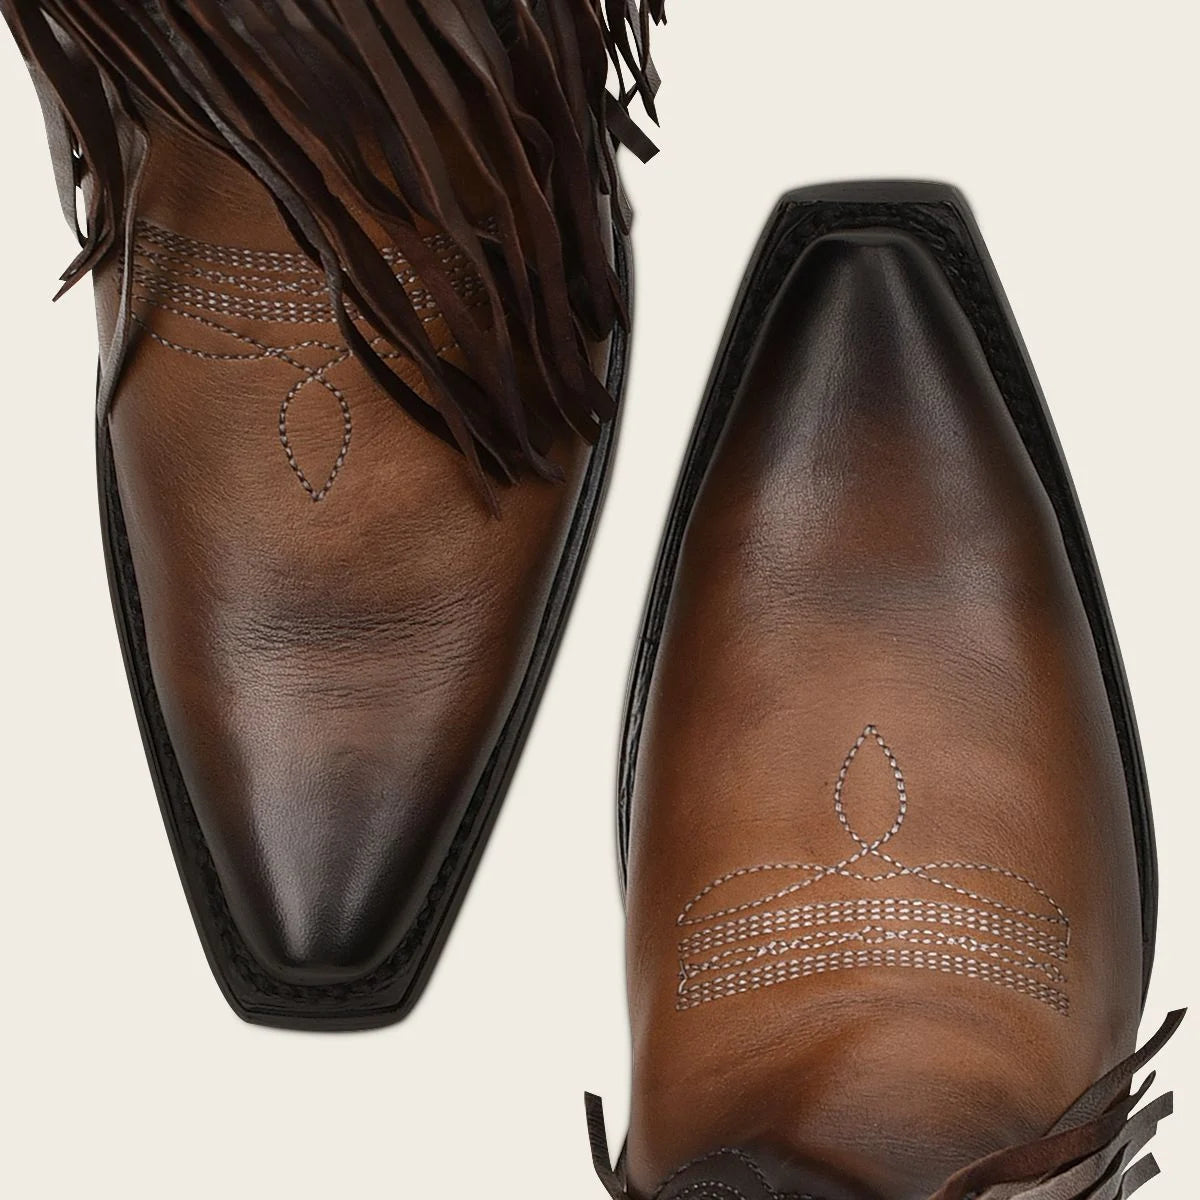 Brown fringed cowboy boot